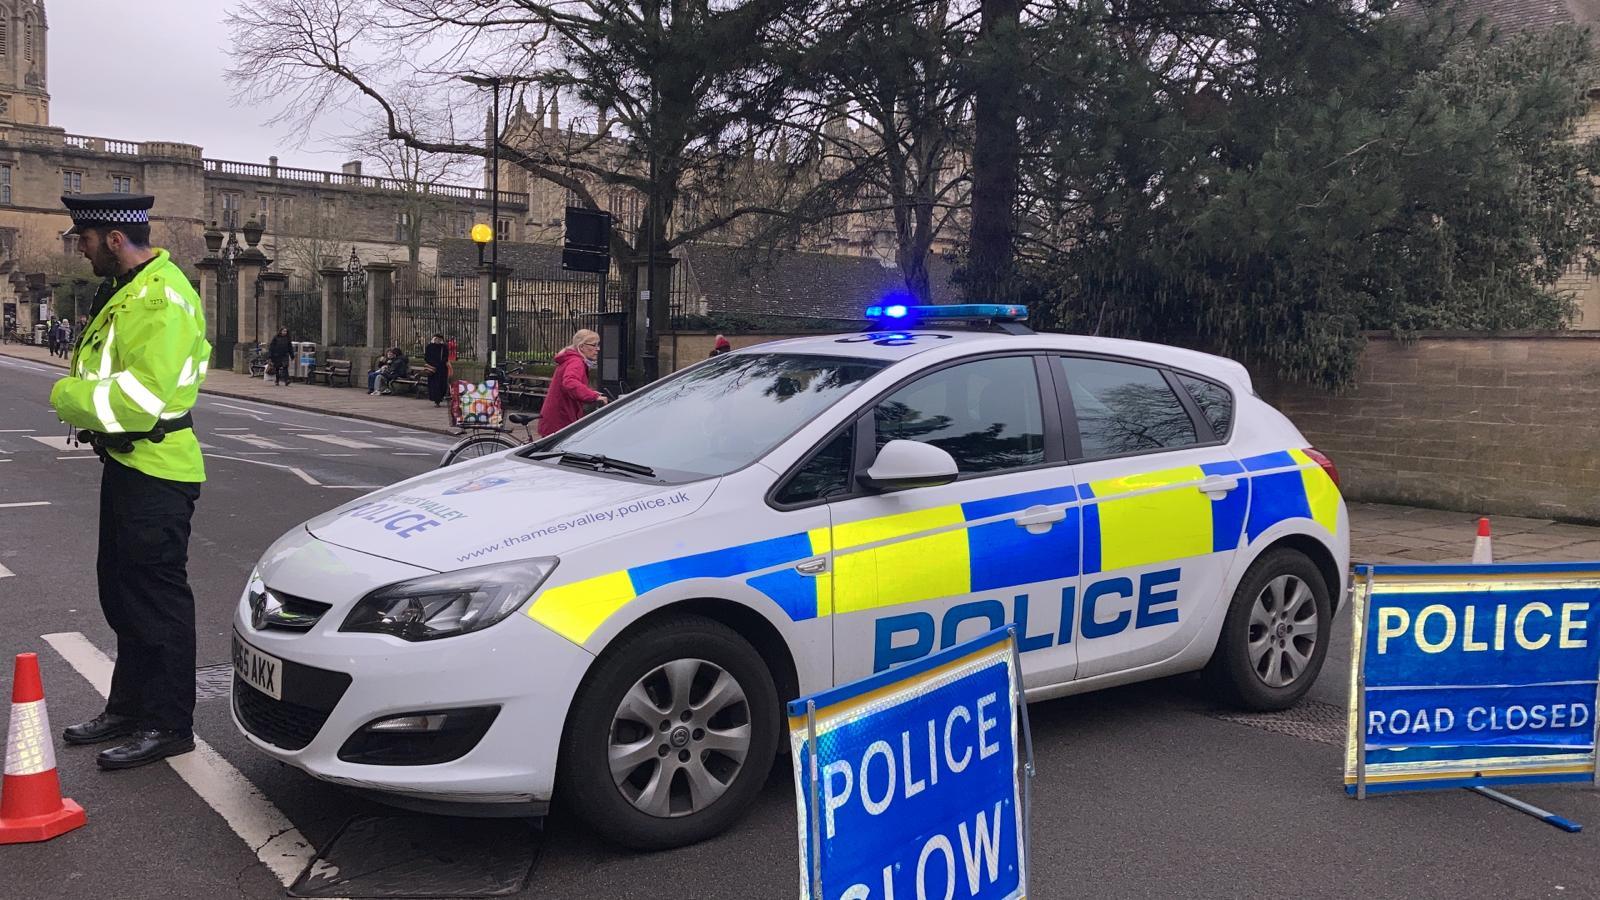 The police road closures extended as far back as St Aldates